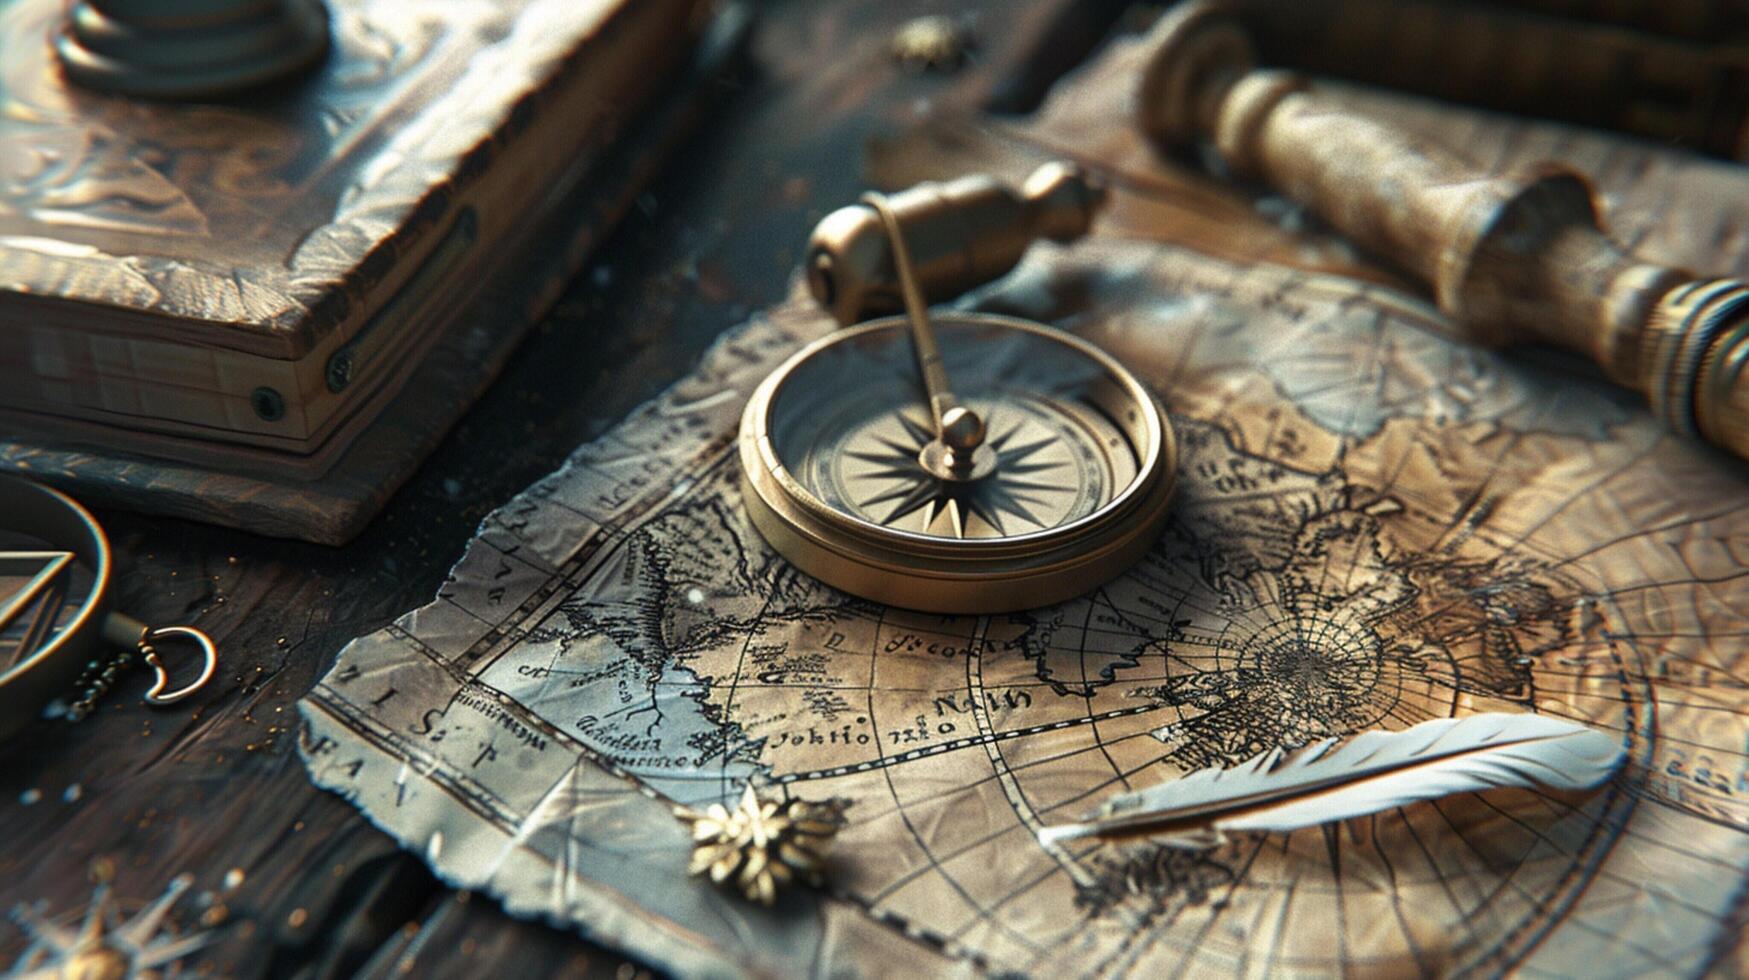 antique compass map and quill pen treasure photo